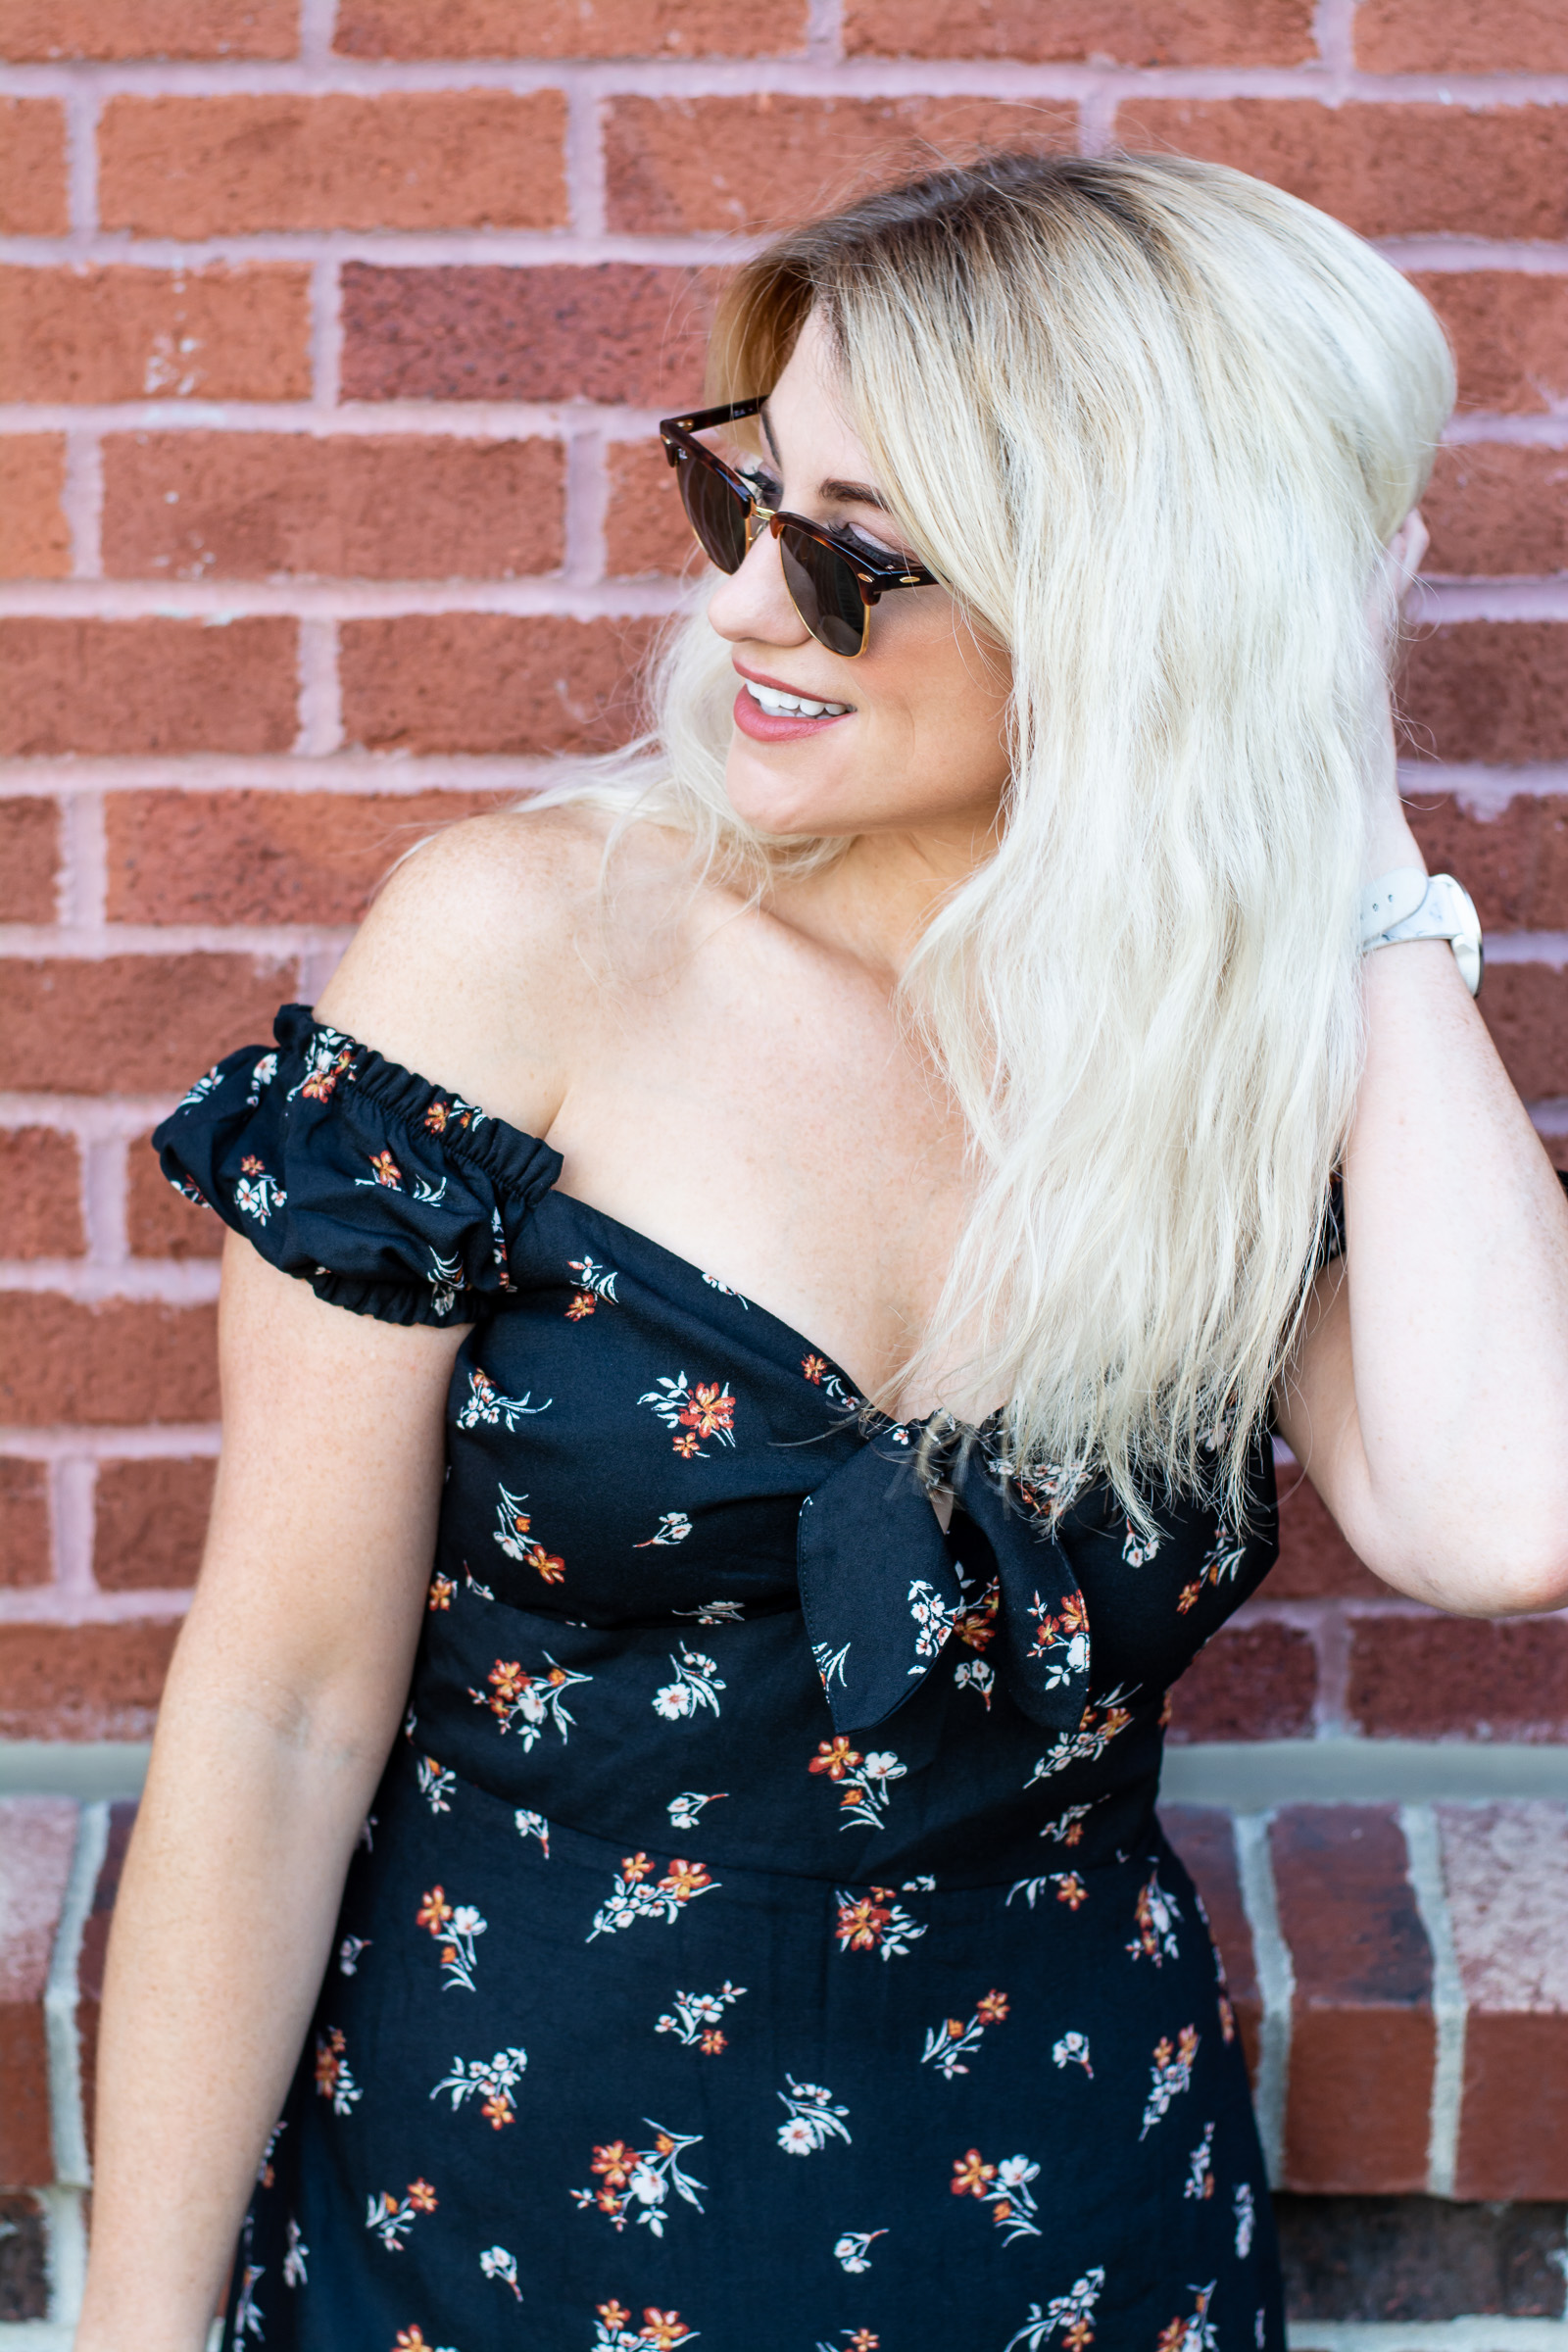 Outfit Idea: Black Floral Off-the-Shoulder Dress + Sneakers. | Ash from LSR